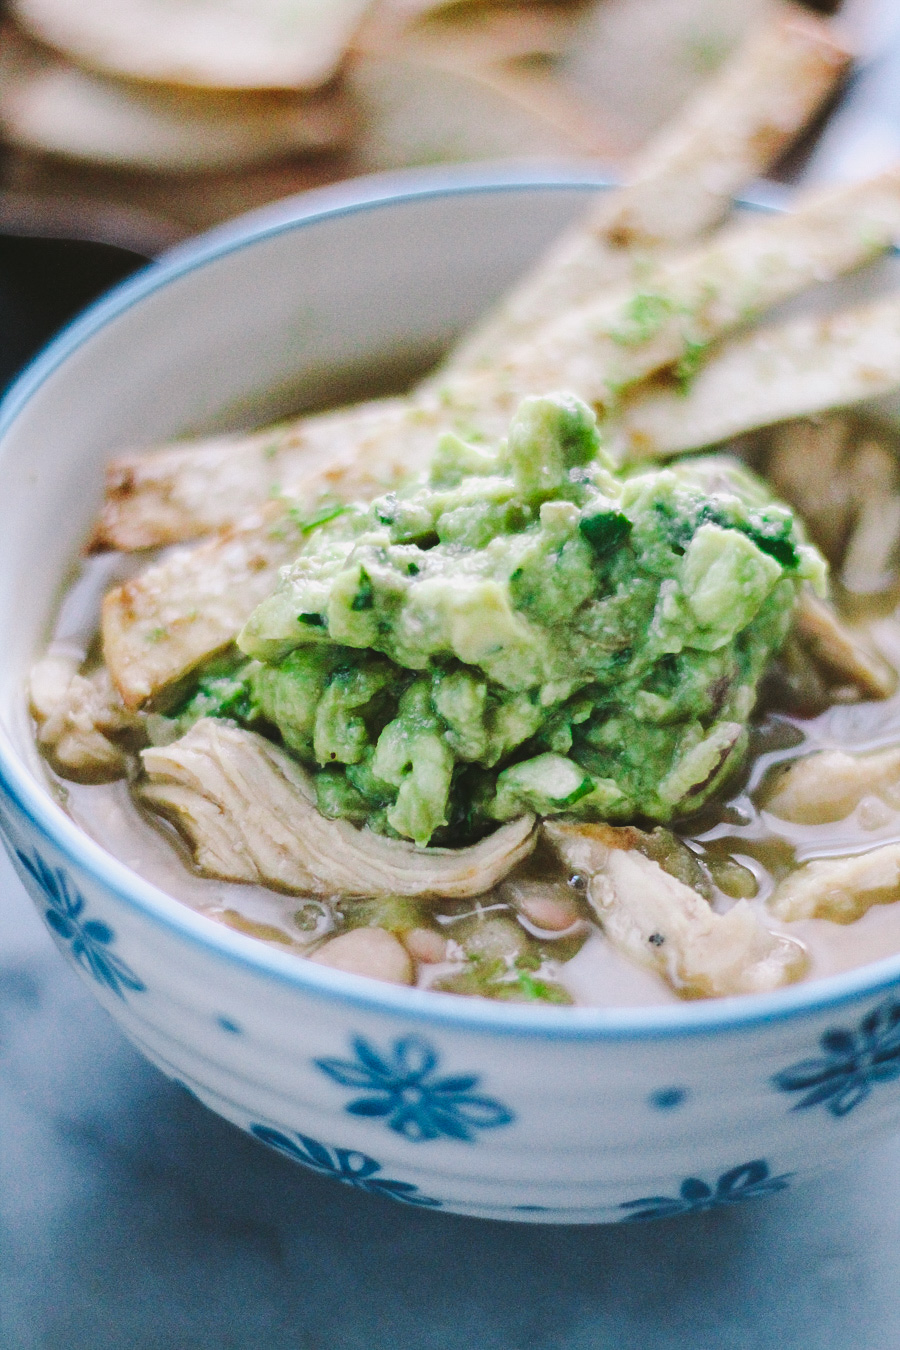 white chili via playswellwithbutter | packed with flavor from a carefully built base of onions, chili peppers, & warm spices, this white chili is braised with beer, loaded with pulled roasted chicken breast, & thickened with masa harina. oh, & if that didn't win you over, spoonfuls of white chili make for the perfect vessel for guacamole. #boom.